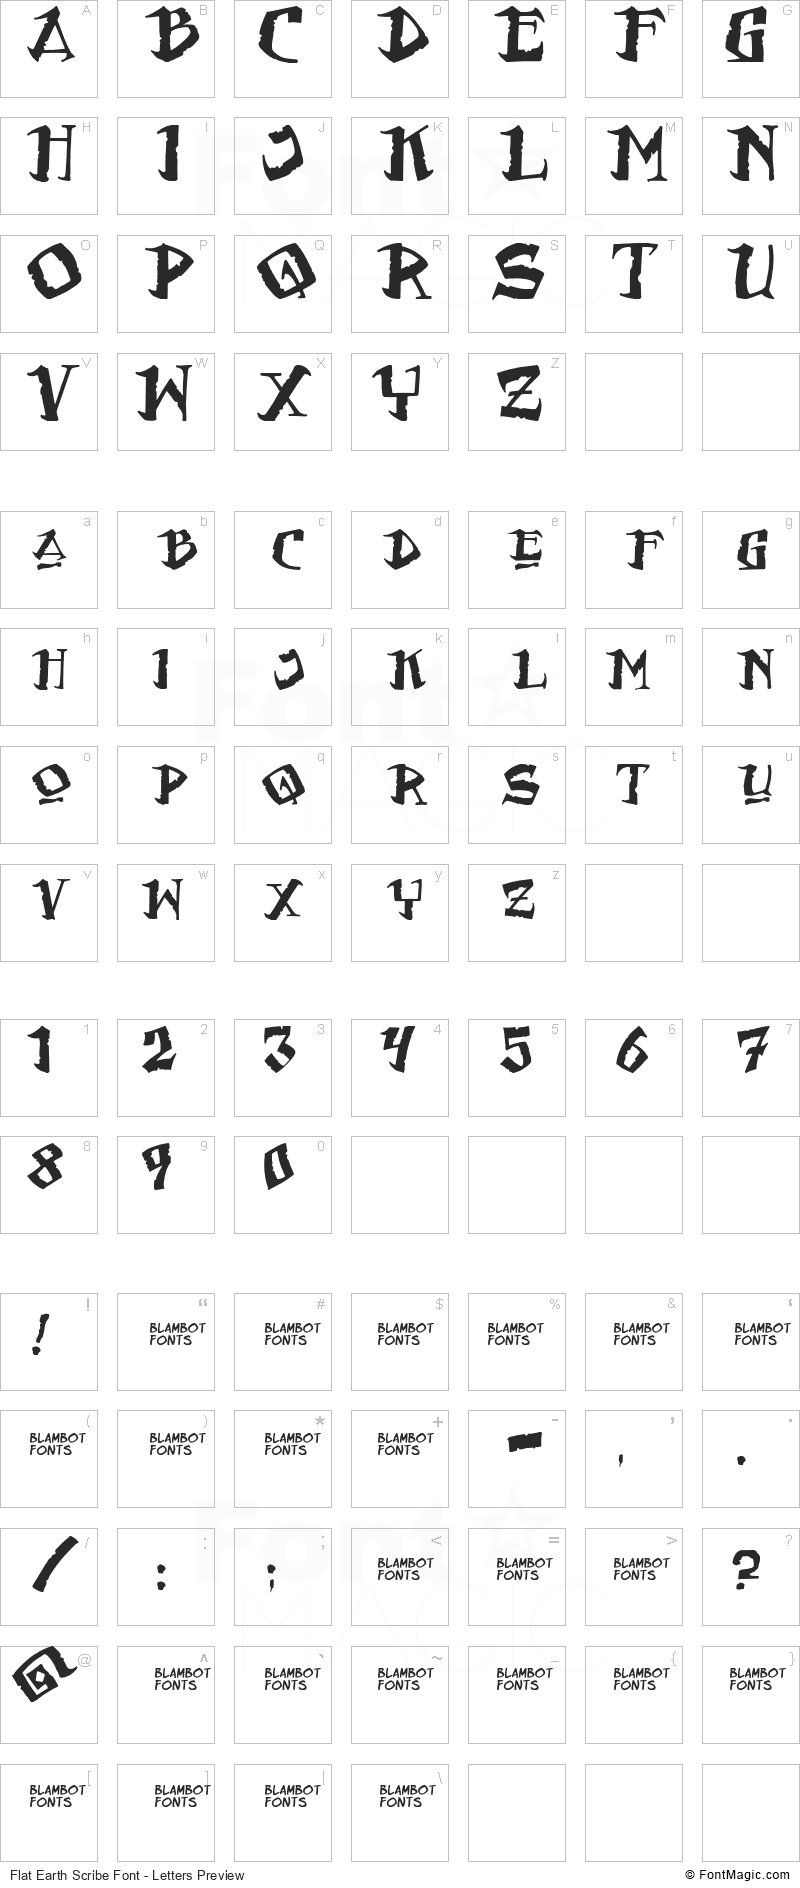 Flat Earth Scribe Font - All Latters Preview Chart